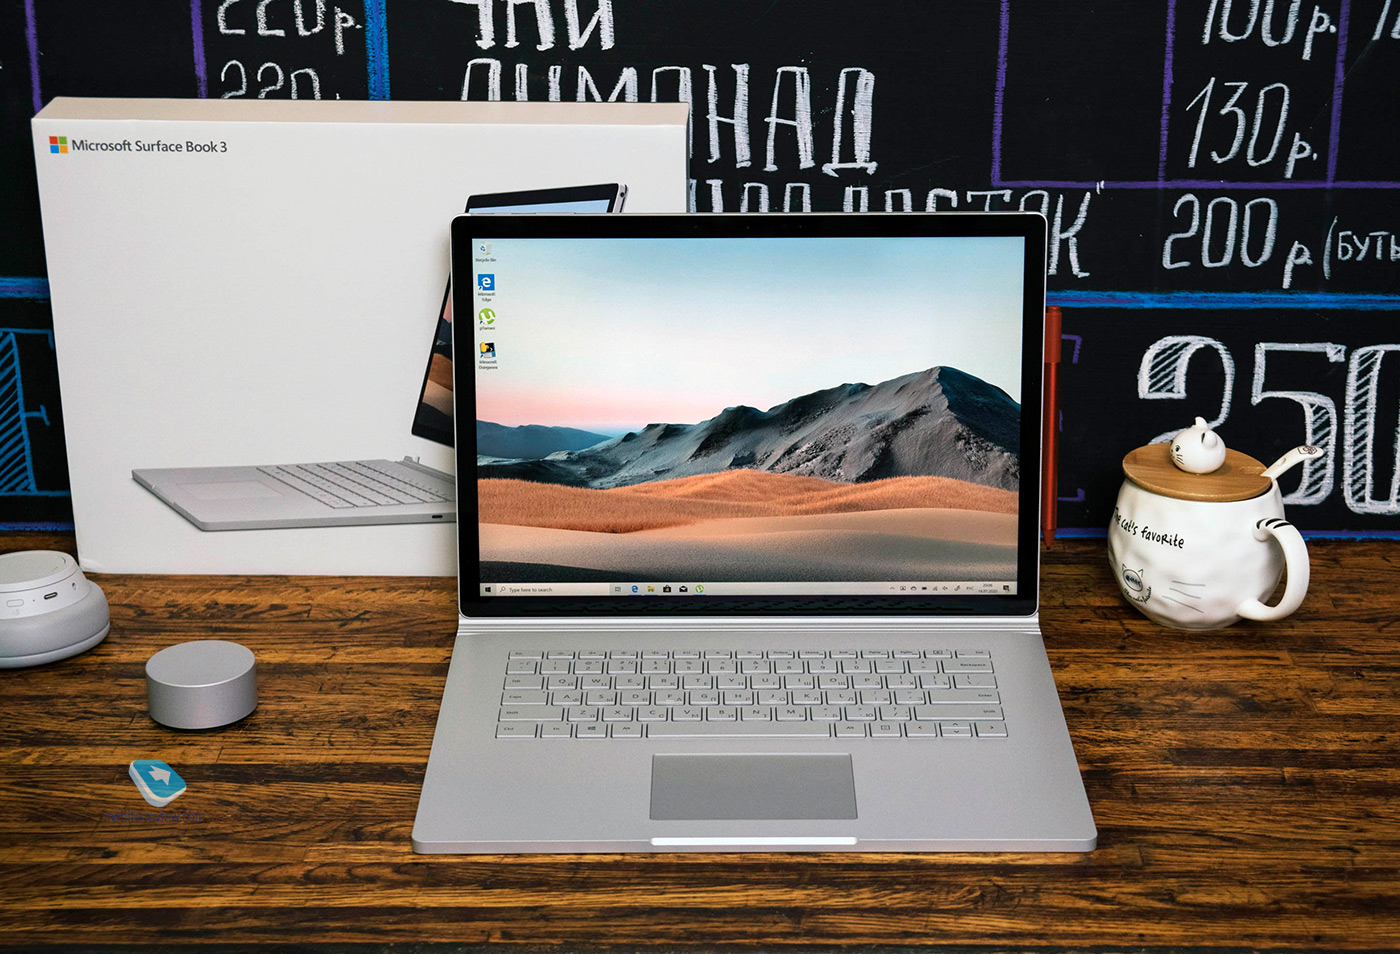 Microsoft's flagship review - Surface Book 3 two-in-one laptop